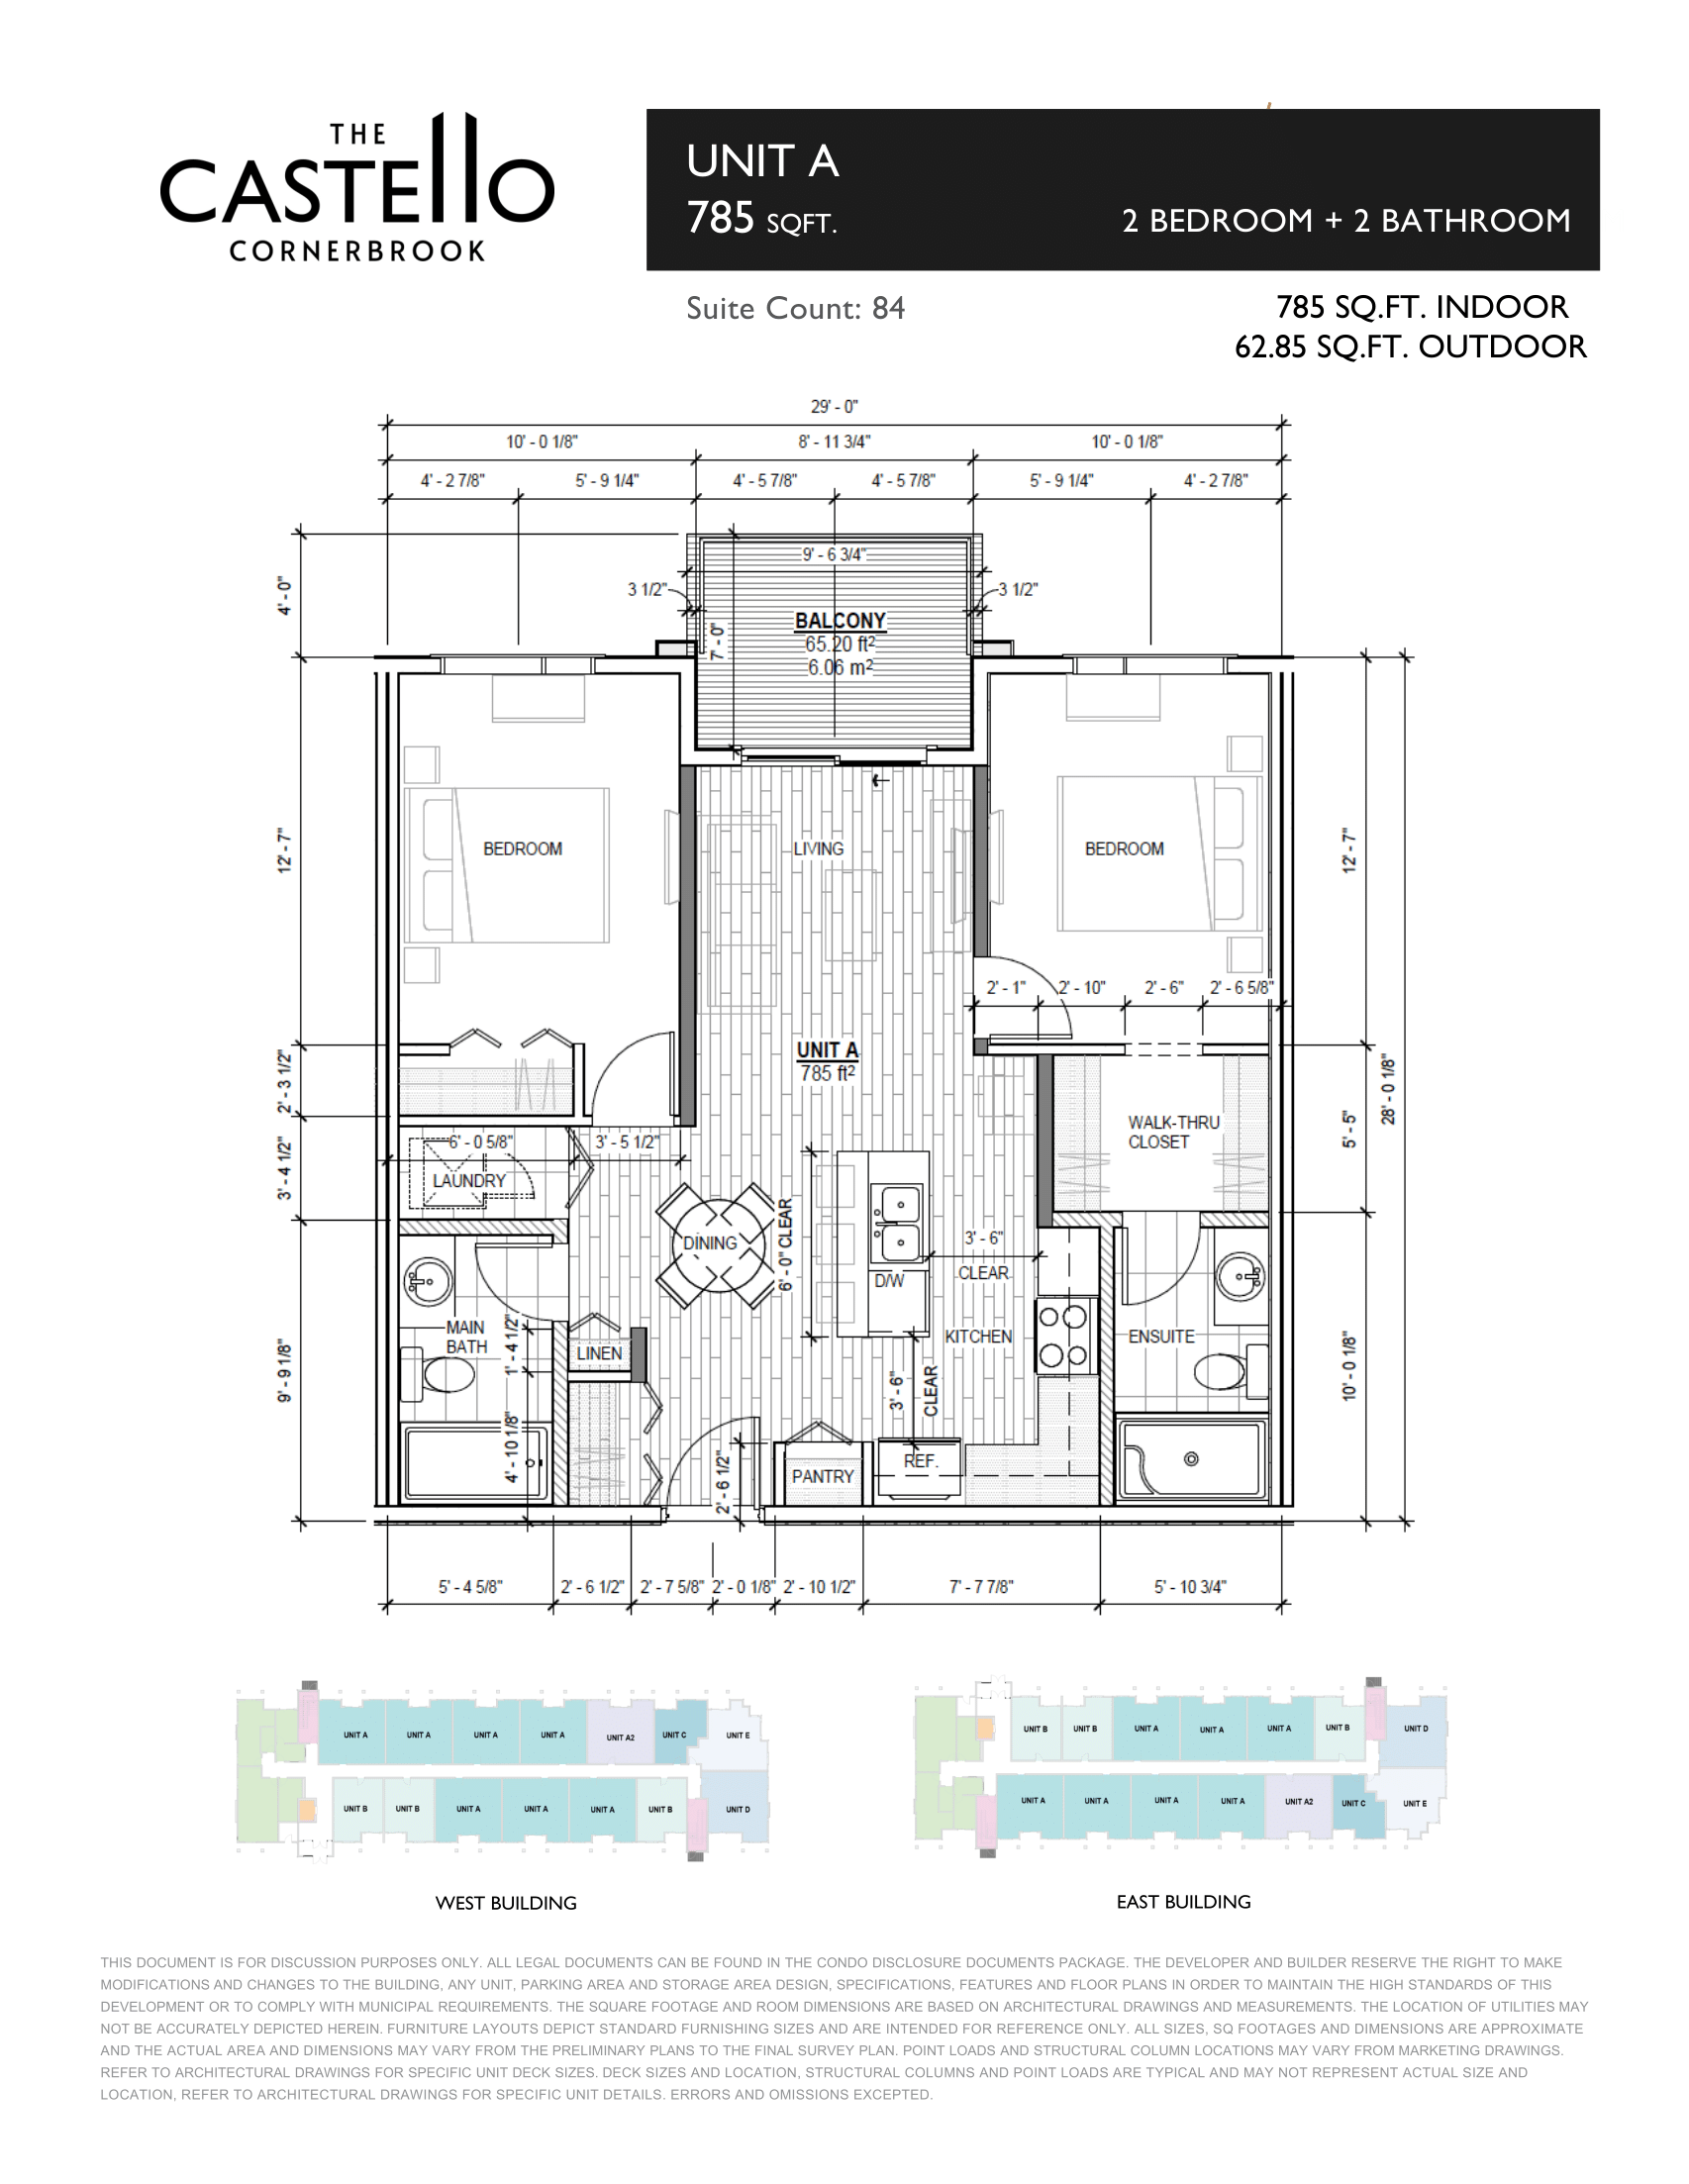  Floor Plan of The Castello in Cornerbrook with undefined beds